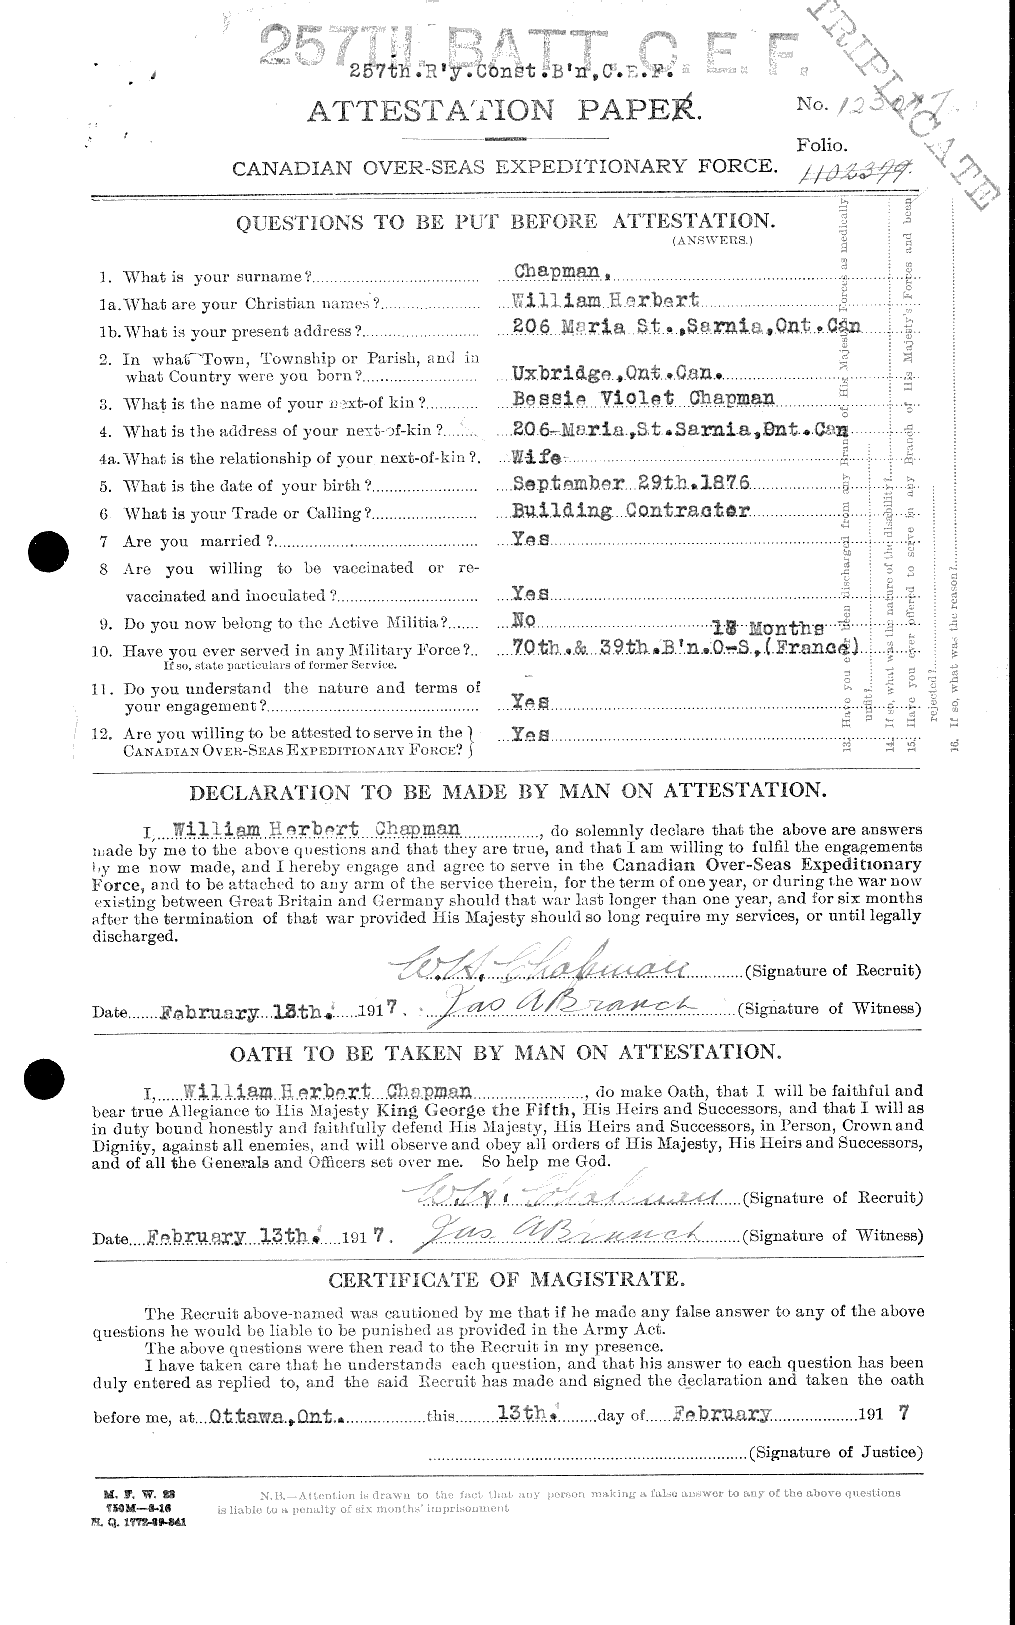 Personnel Records of the First World War - CEF 014861c